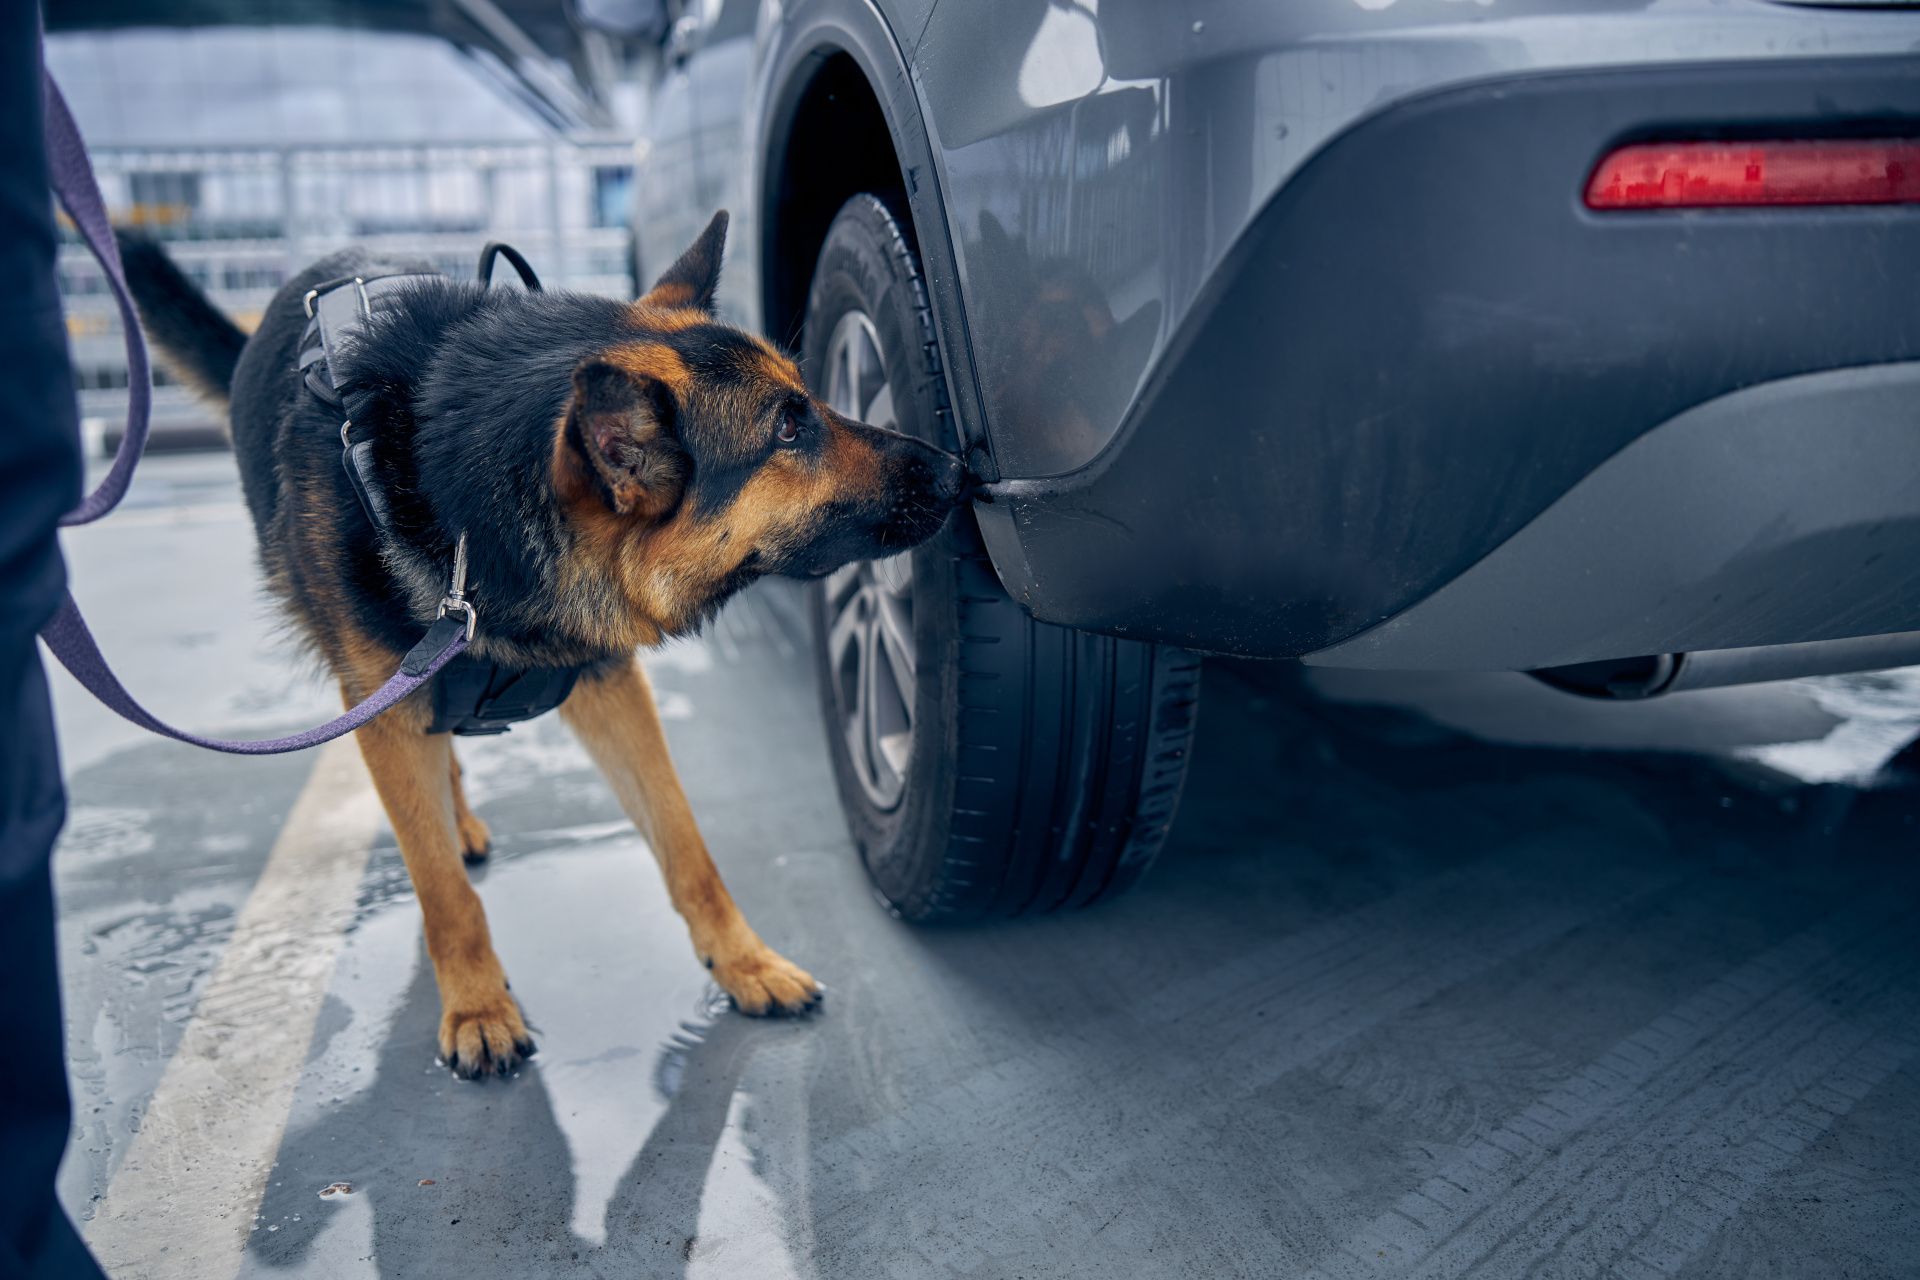 Security K9 Guard Dog sniffing around car undergoing drug detection